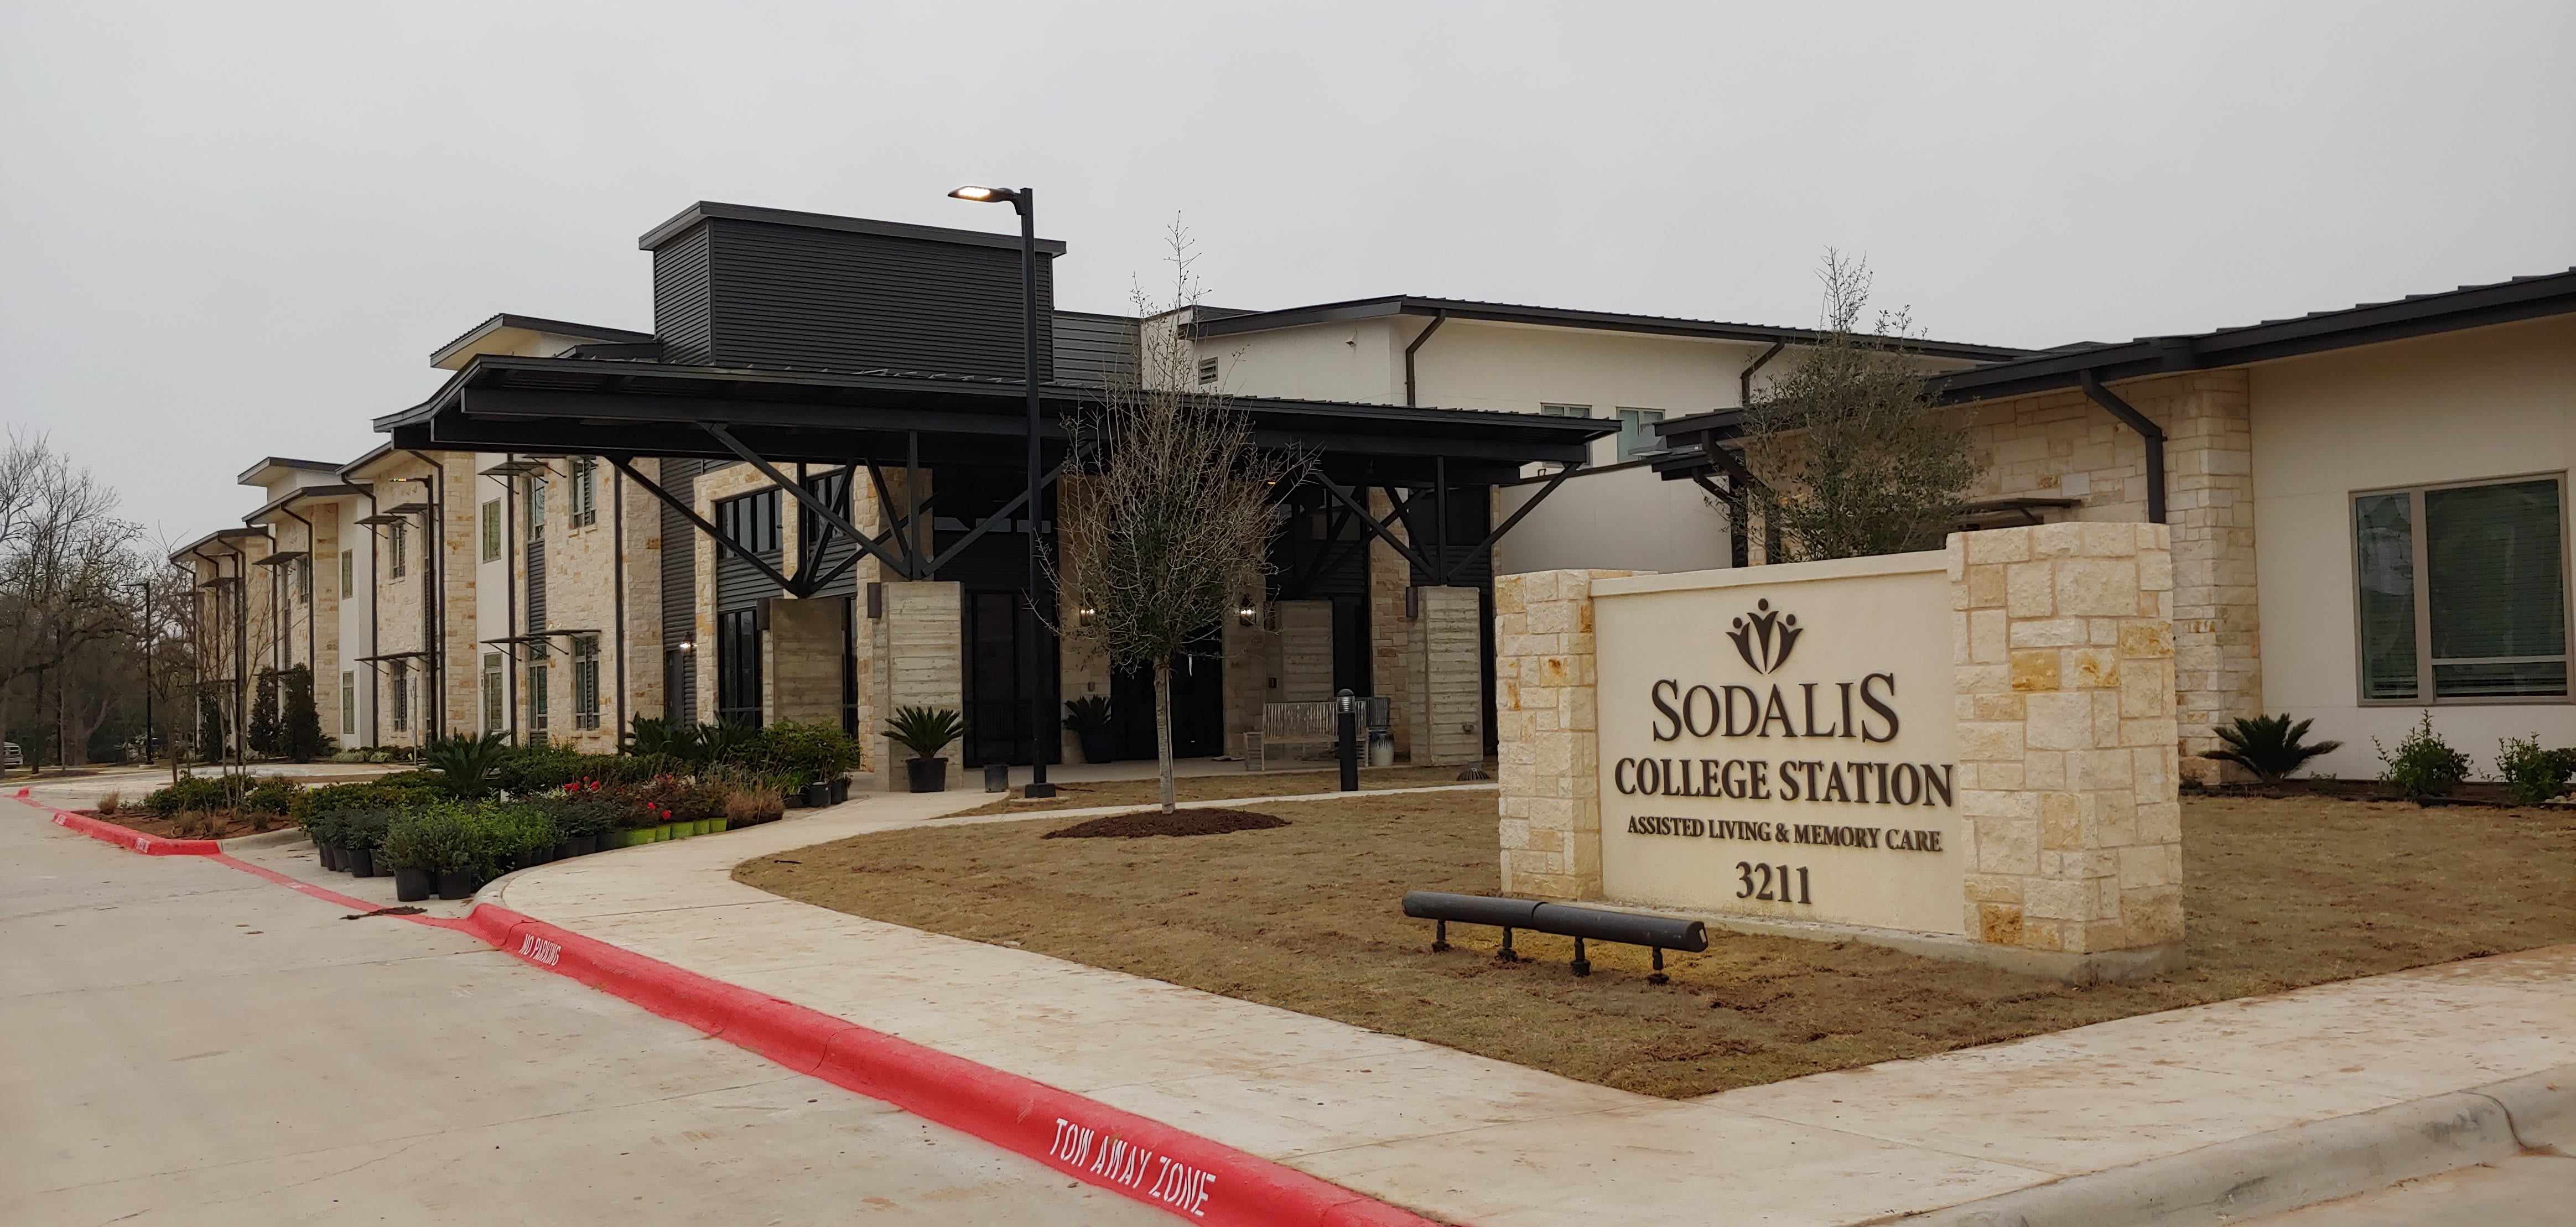 Sodalis College Station outdoor common area